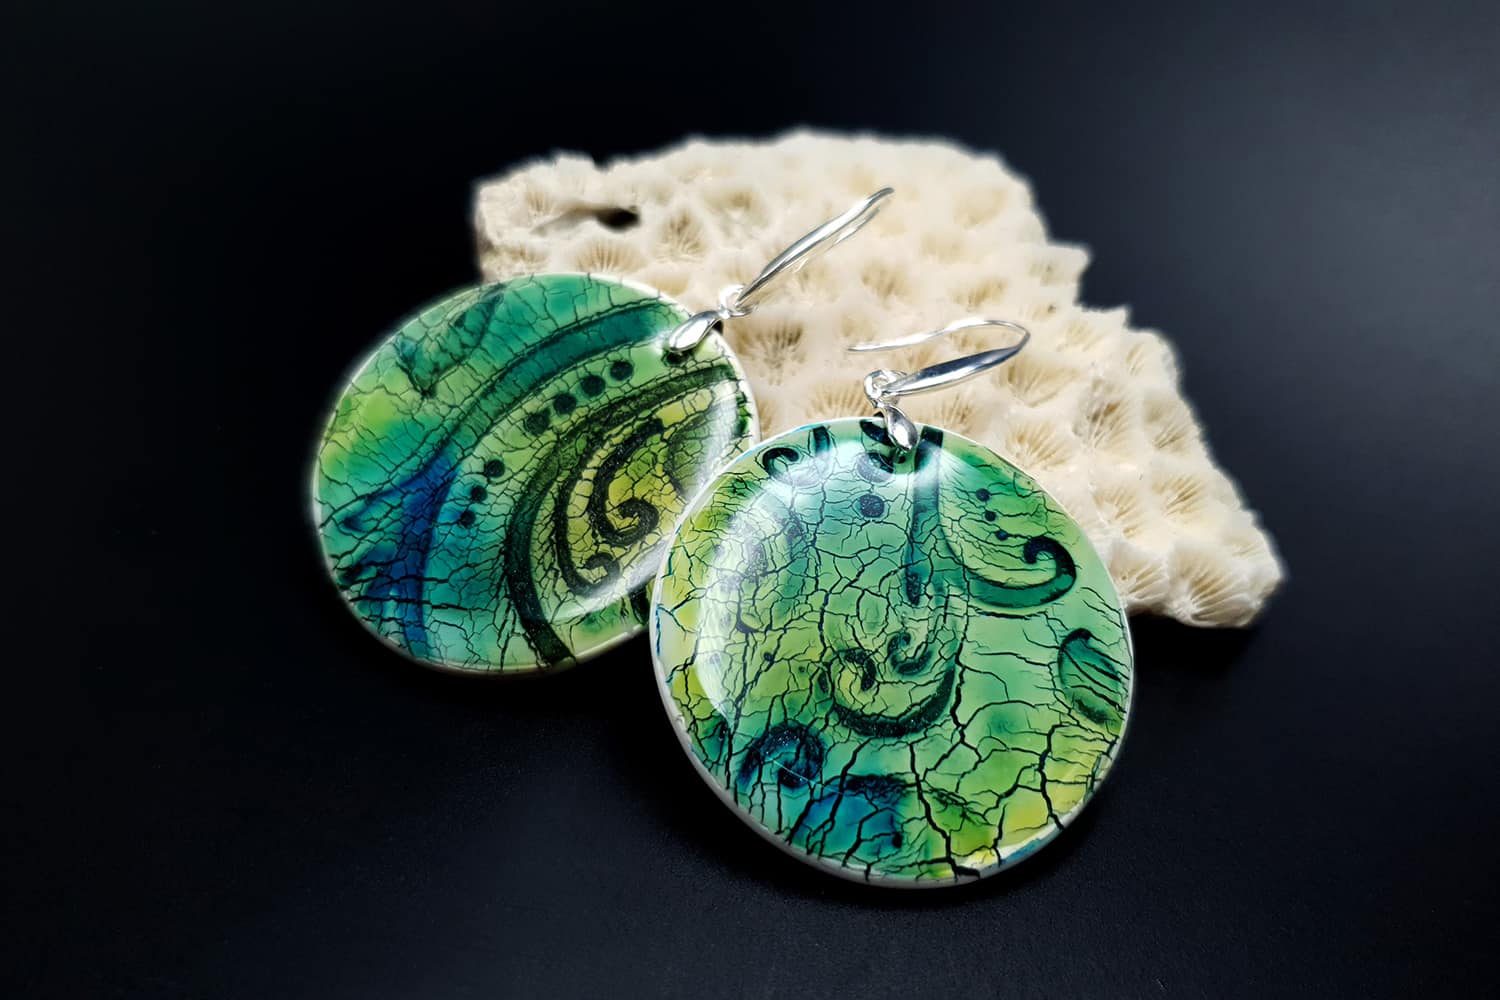 Jewelry from "Faux Glazed Cracked Ceramic" course for your inspiration #3